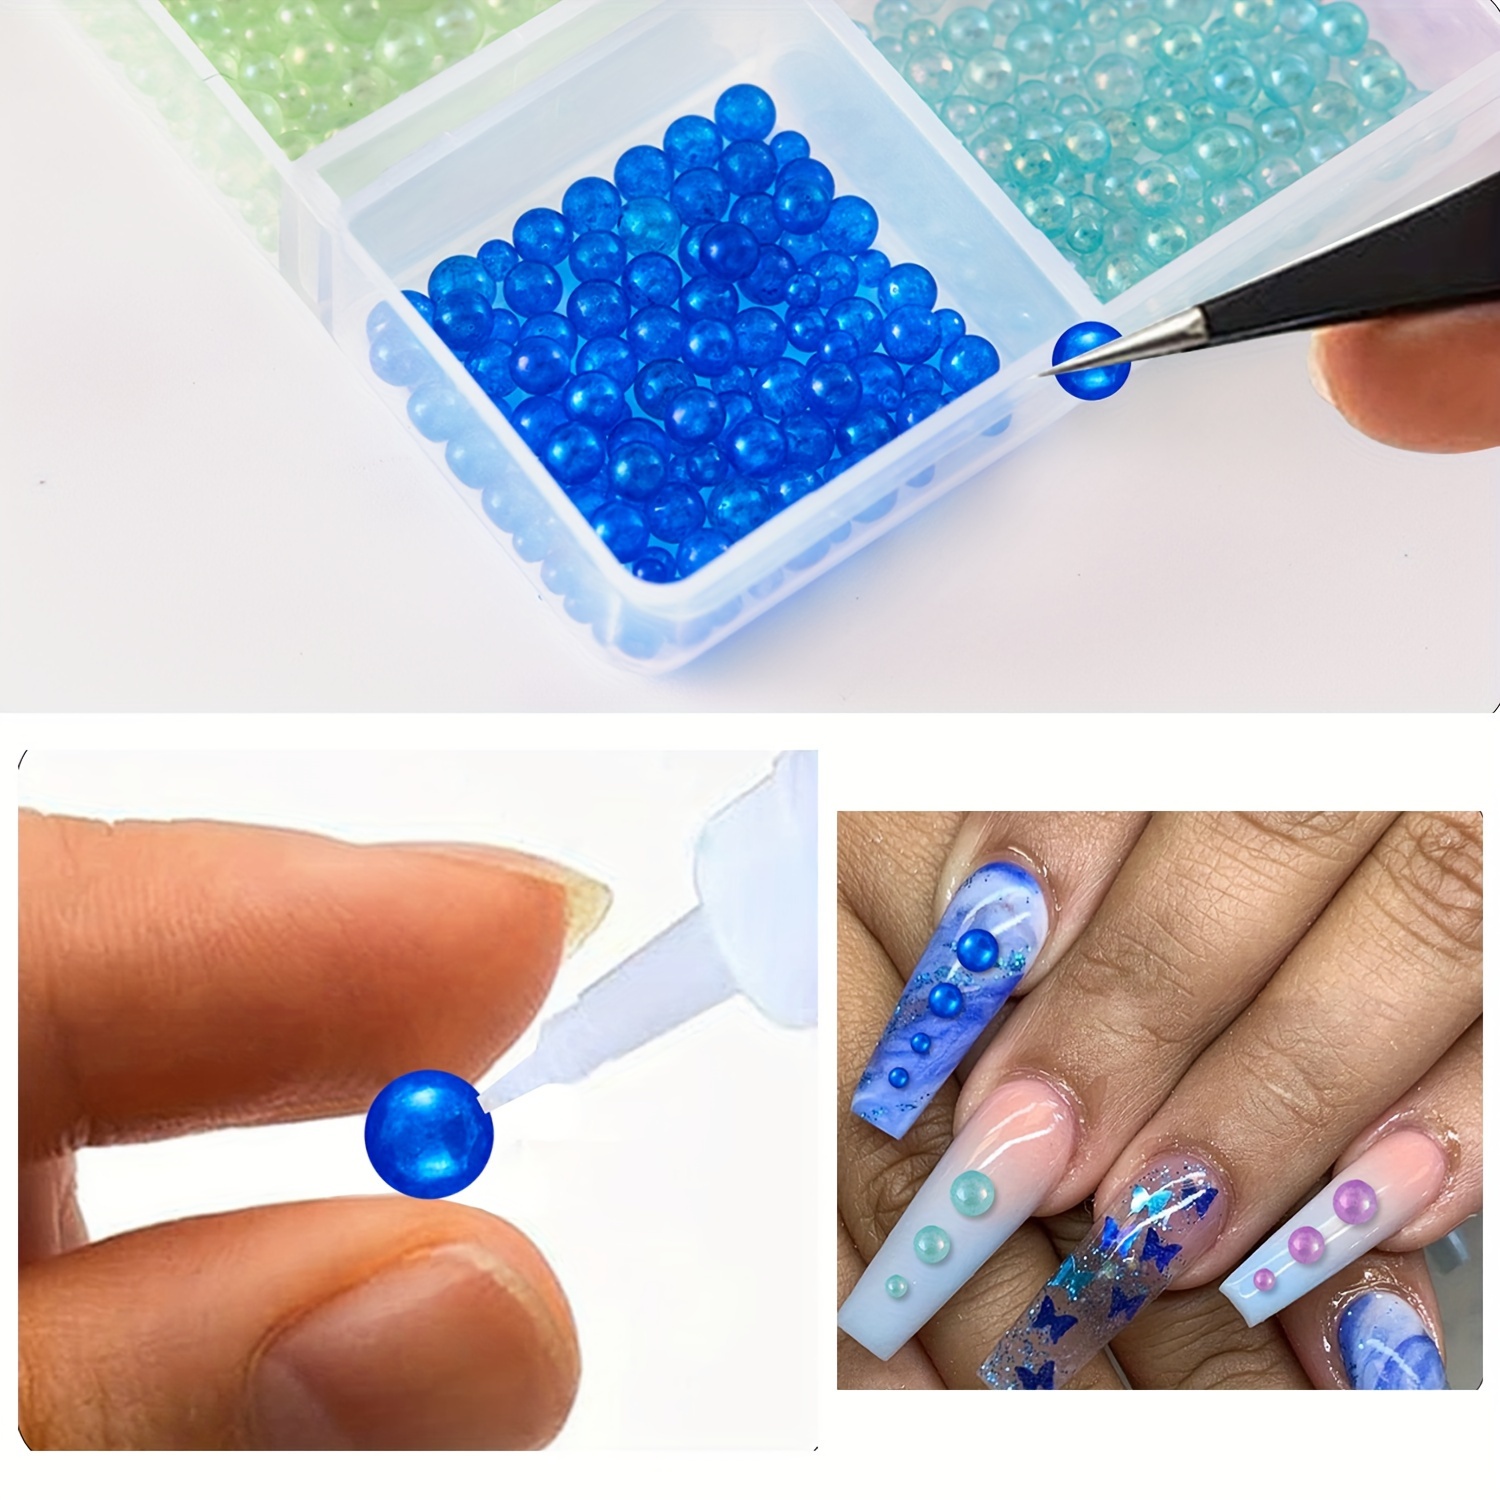 6 Grids Nail Art Rhinestones Set Colorful Flatback Rhinestones Glass  Crystal Gems For Nails Design Rhinestone Beads Gems For Crafts Clothes Face  Makeu